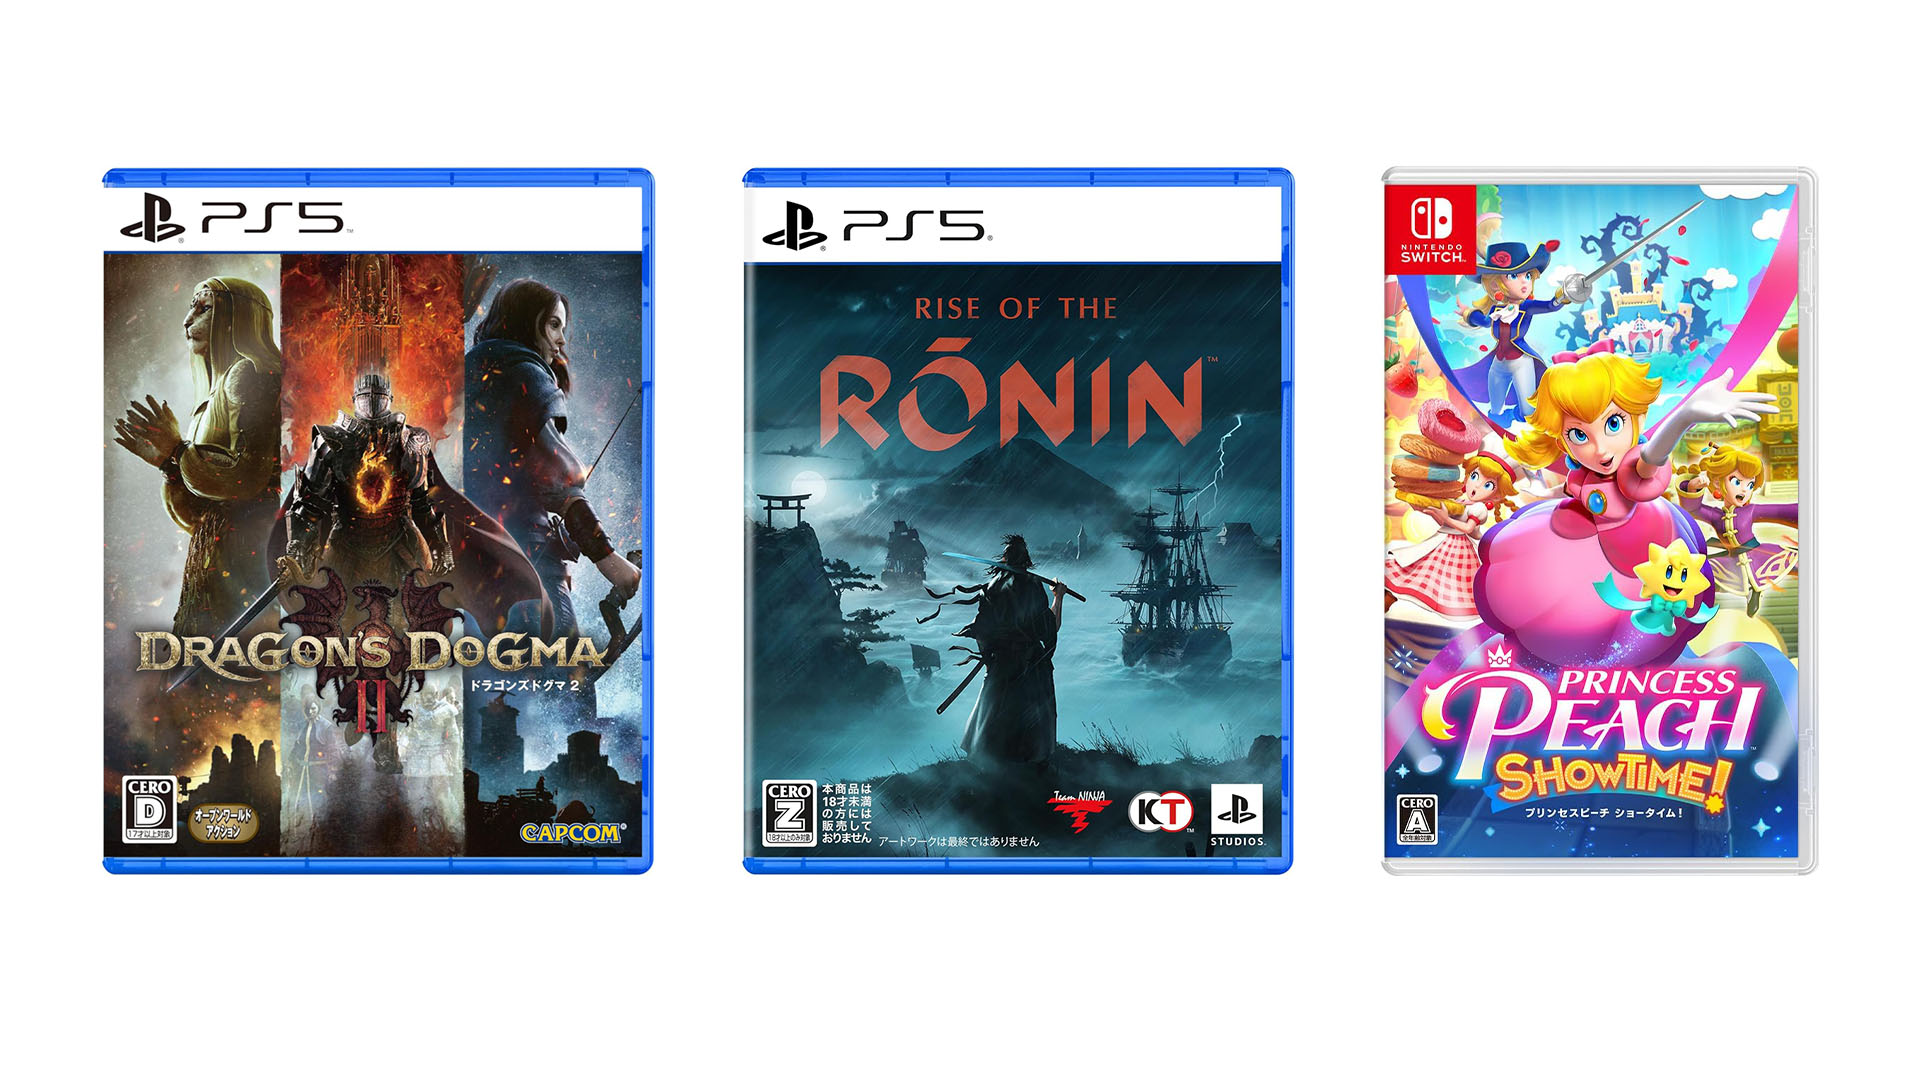 This Week’s Japanese Match Releases: Dragon’s Dogma II, Rise of the Ronin, Hello-Fi Rush for PS5, Princess Peach: Showtime!, additional